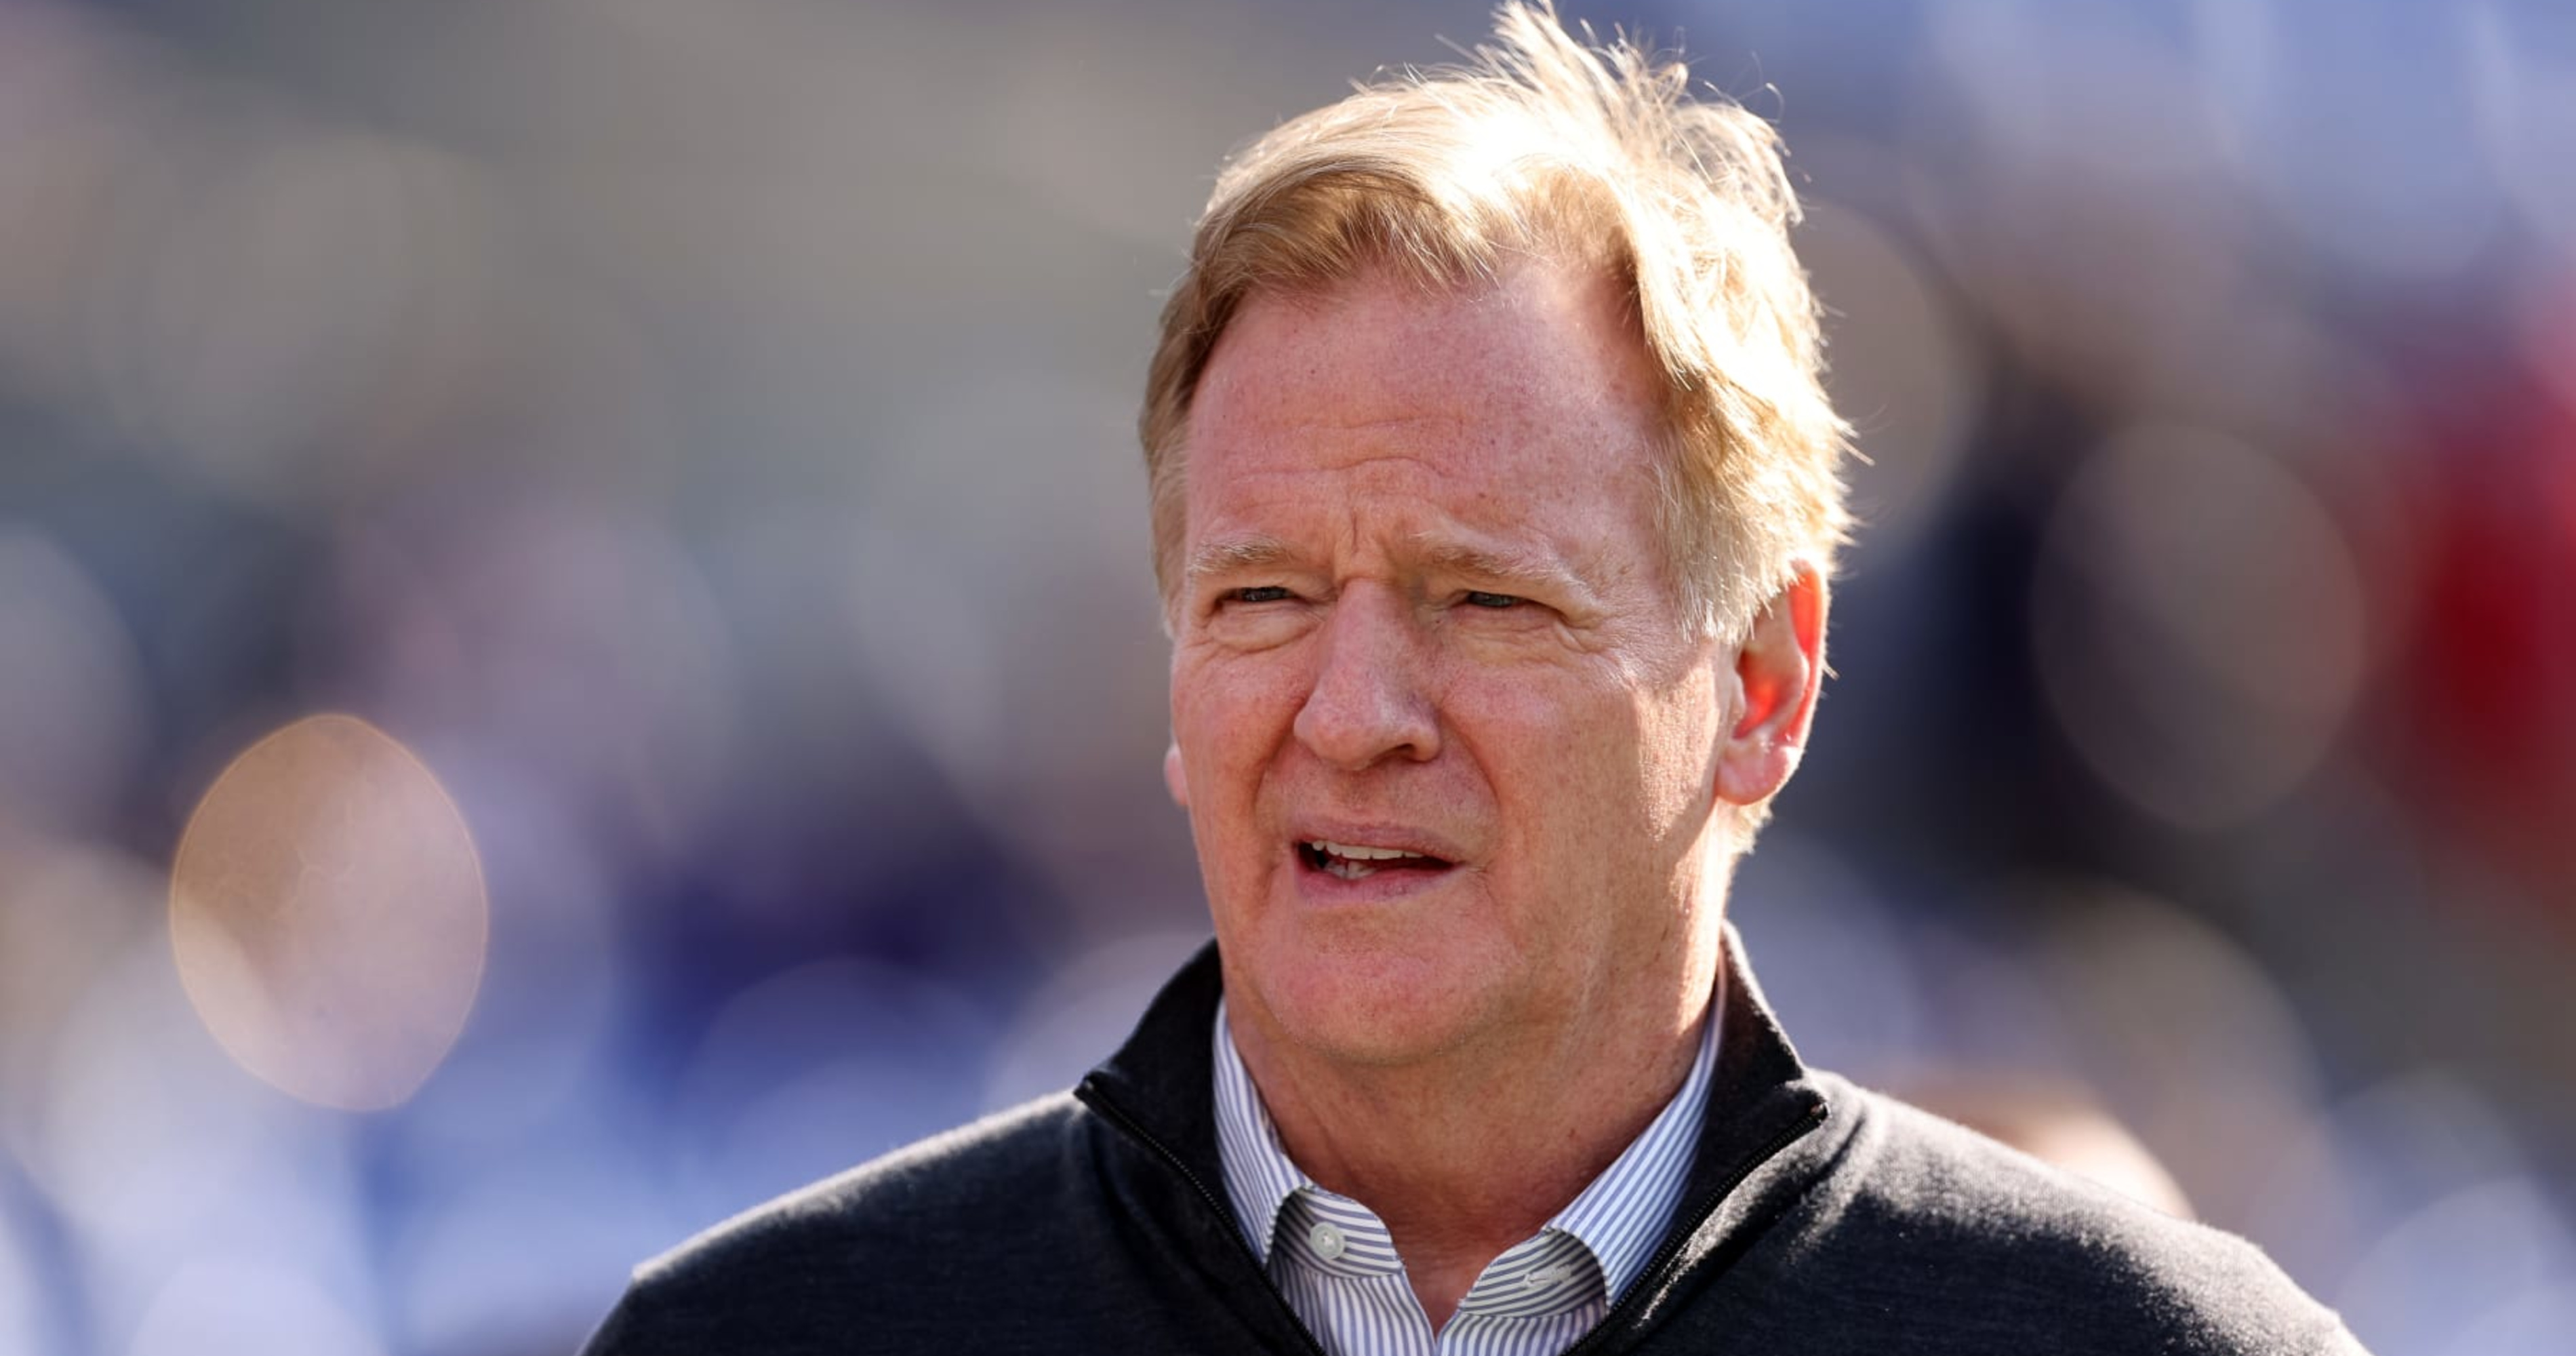 NFL’s Roger Goodell Reportedly Wants Eagles’ ‘Tush Push’ Banned ‘Permanently’